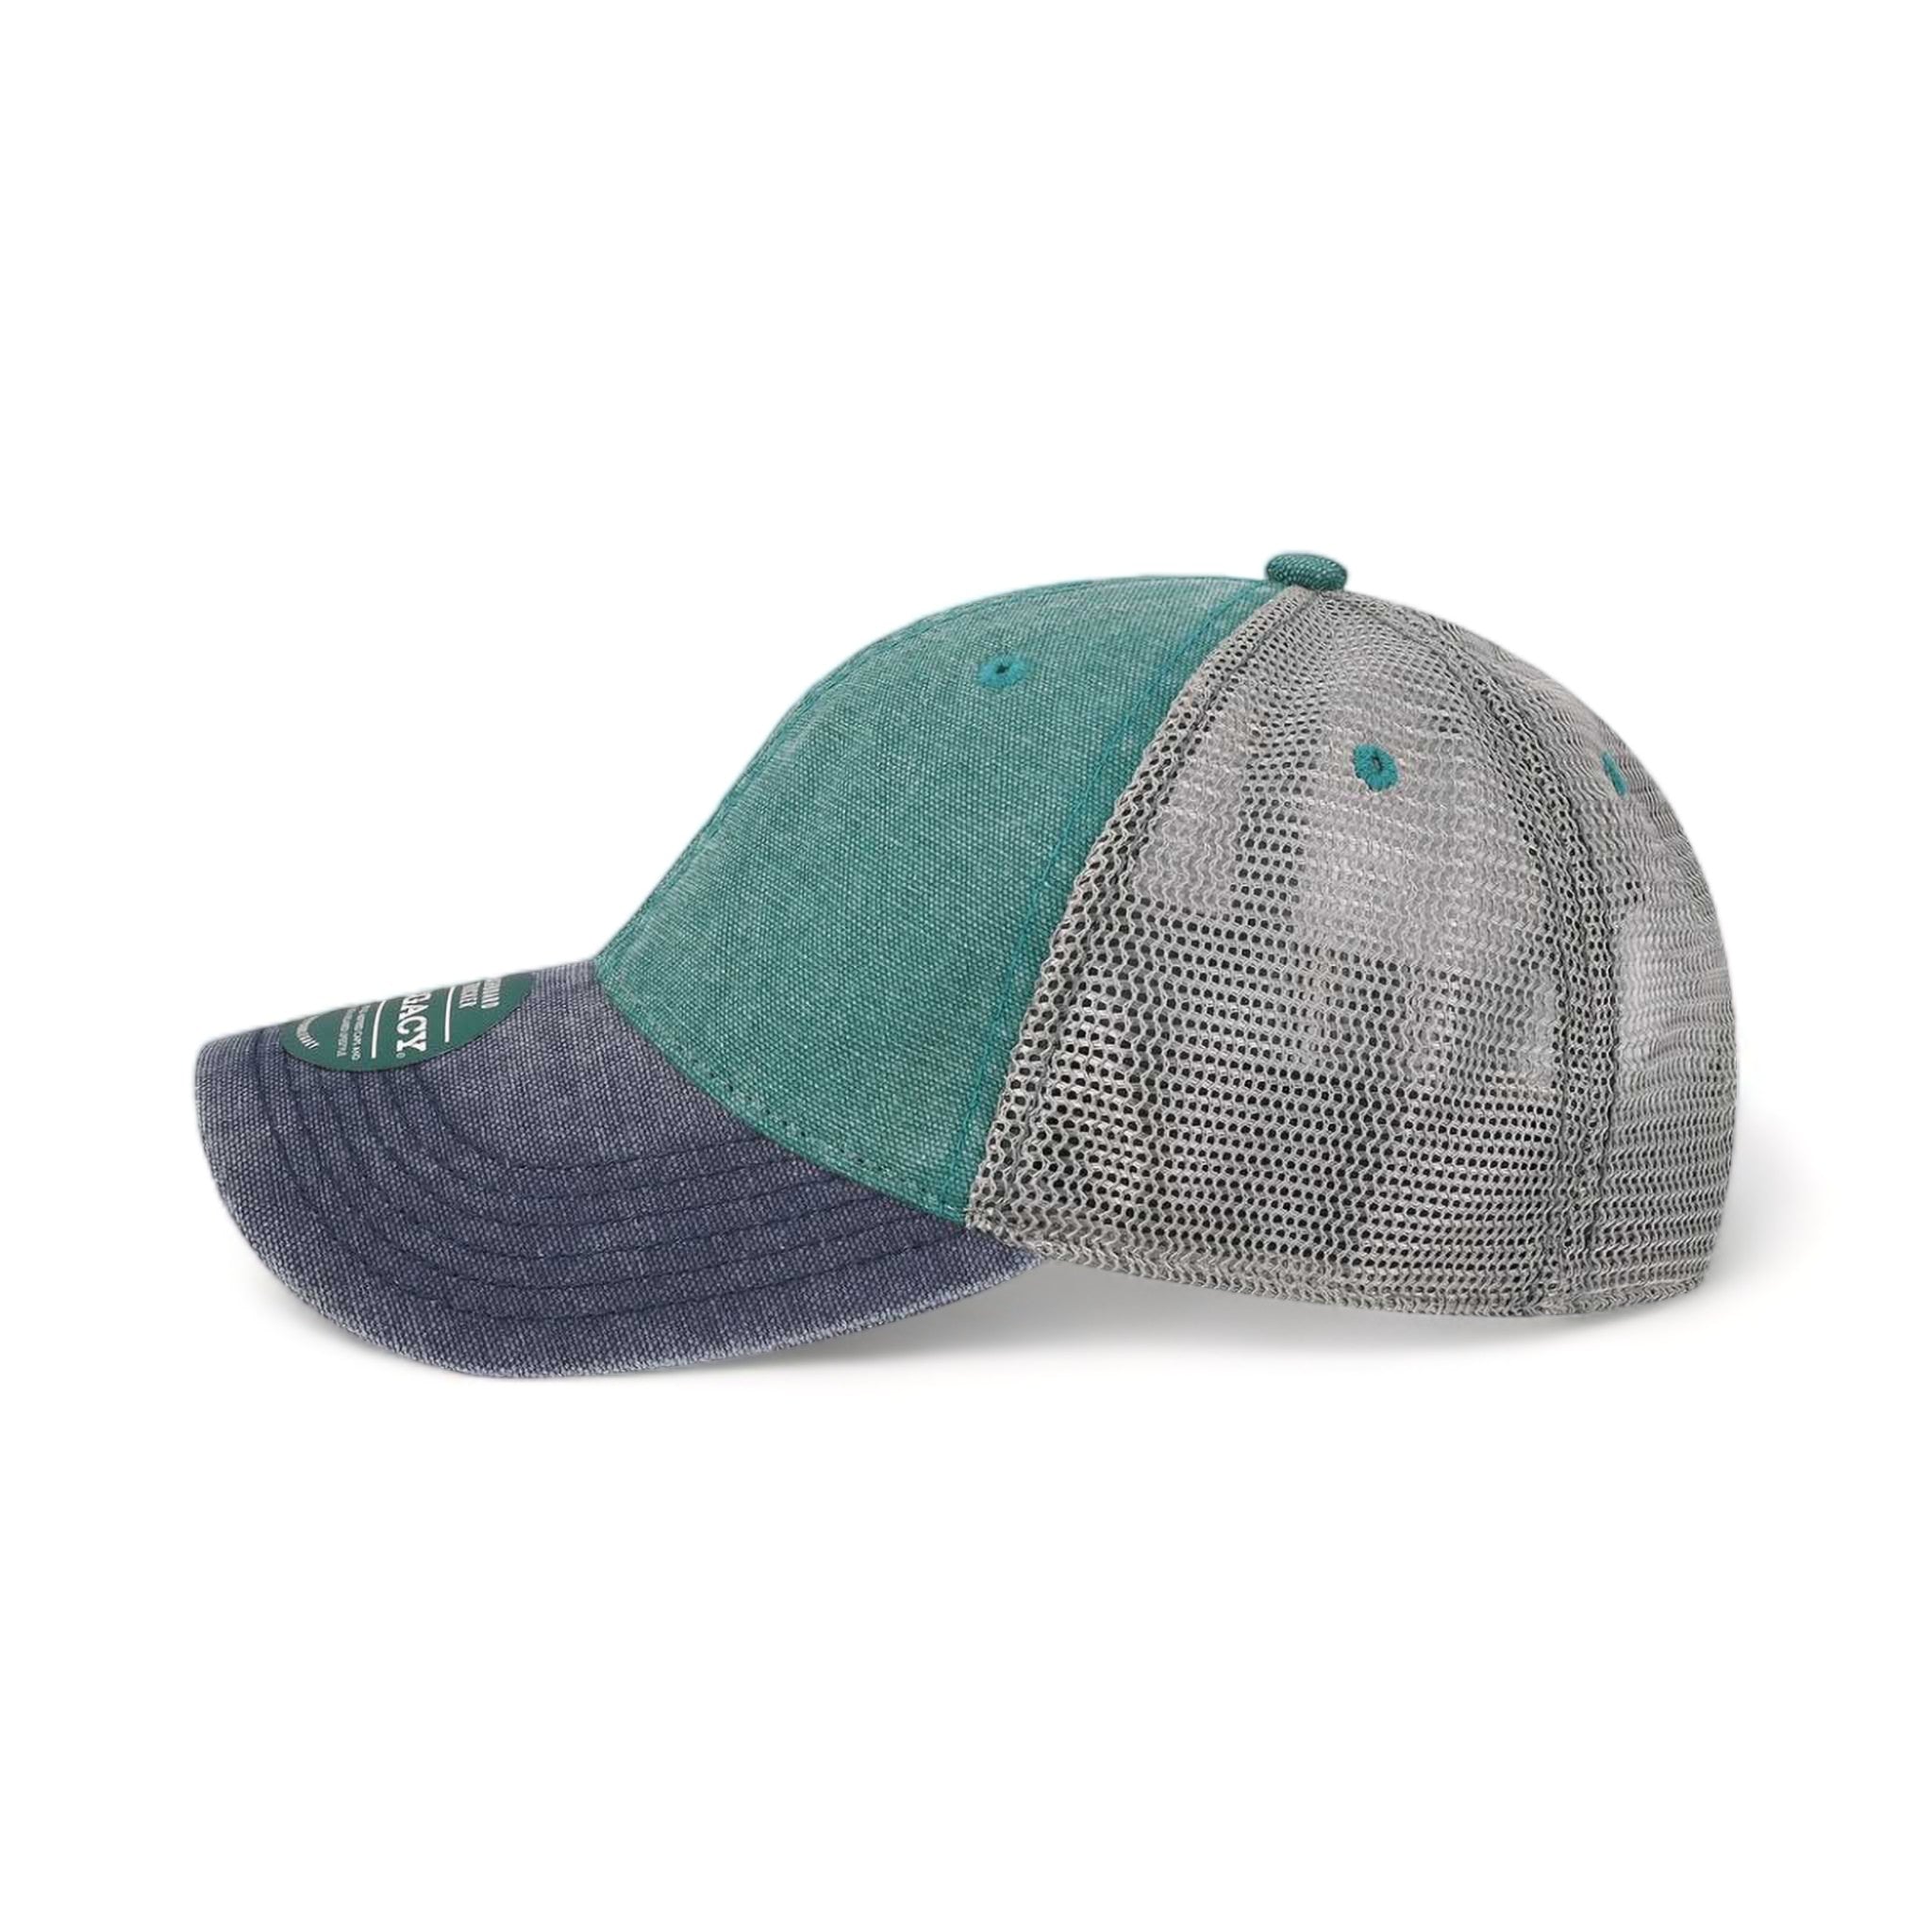 Side view of LEGACY DTA custom hat in marine, navy and grey